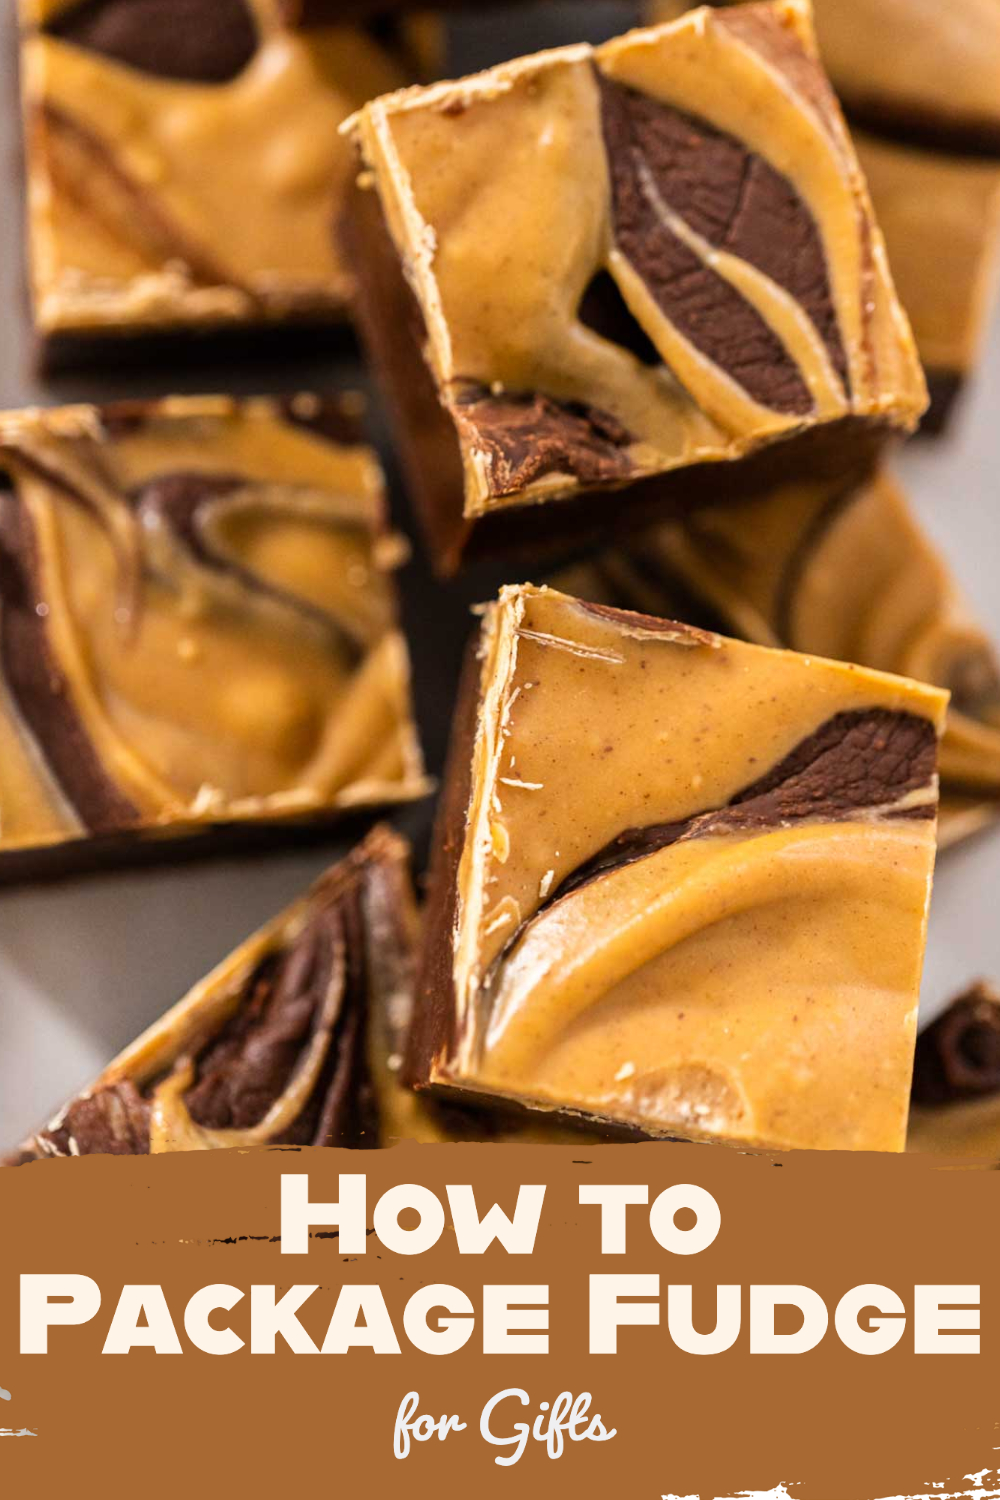 How to Package Fudge for Gifts